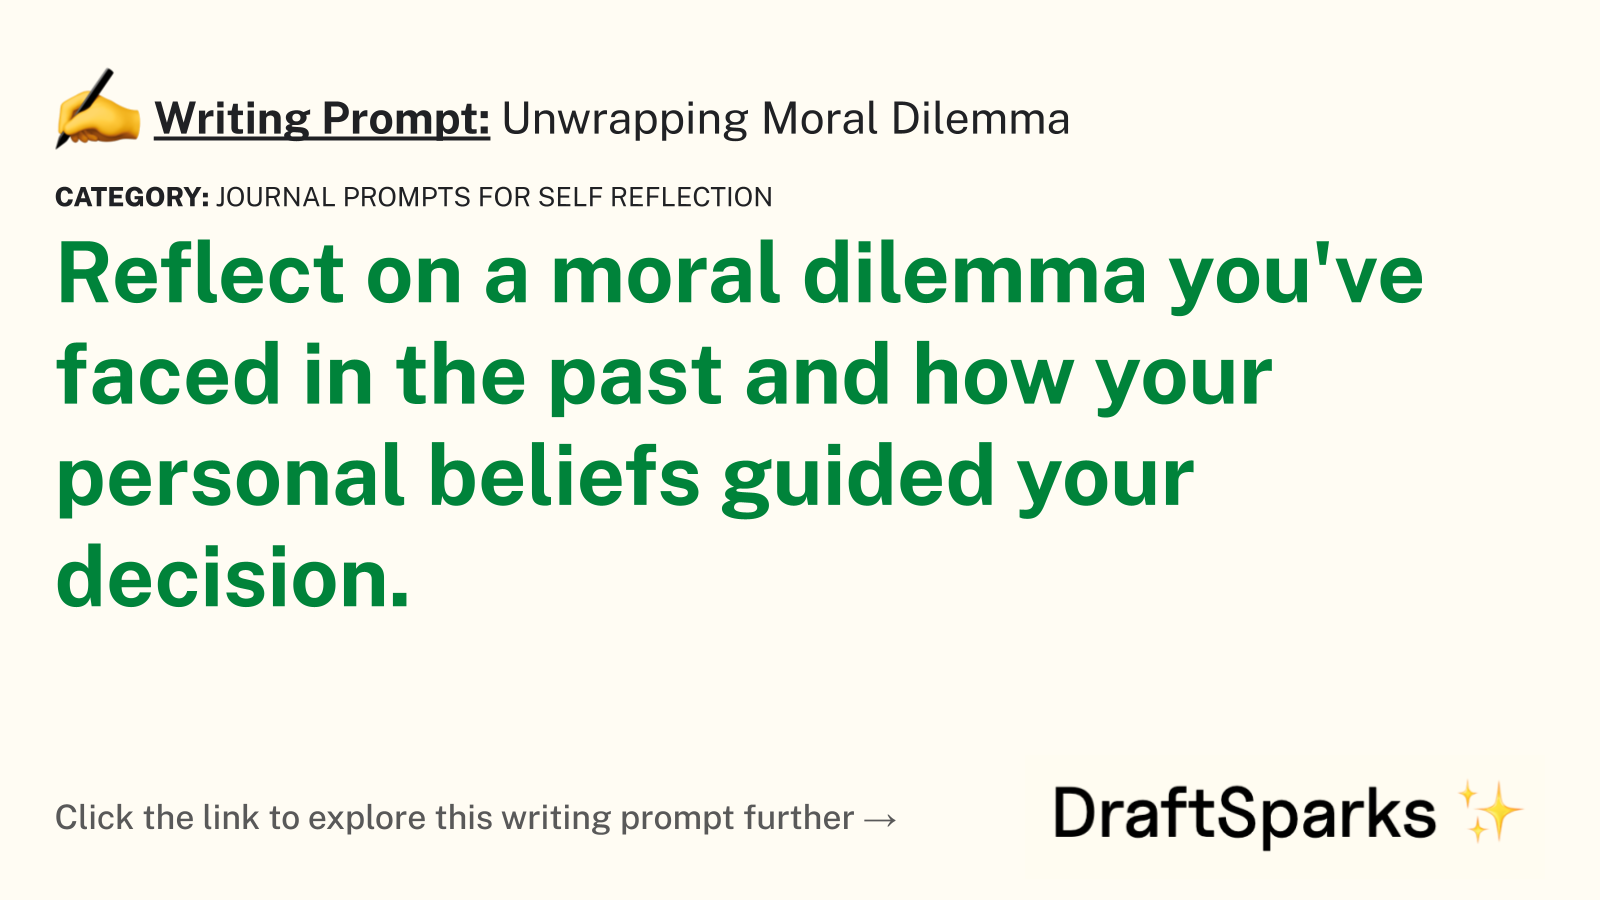 Unwrapping Moral Dilemma